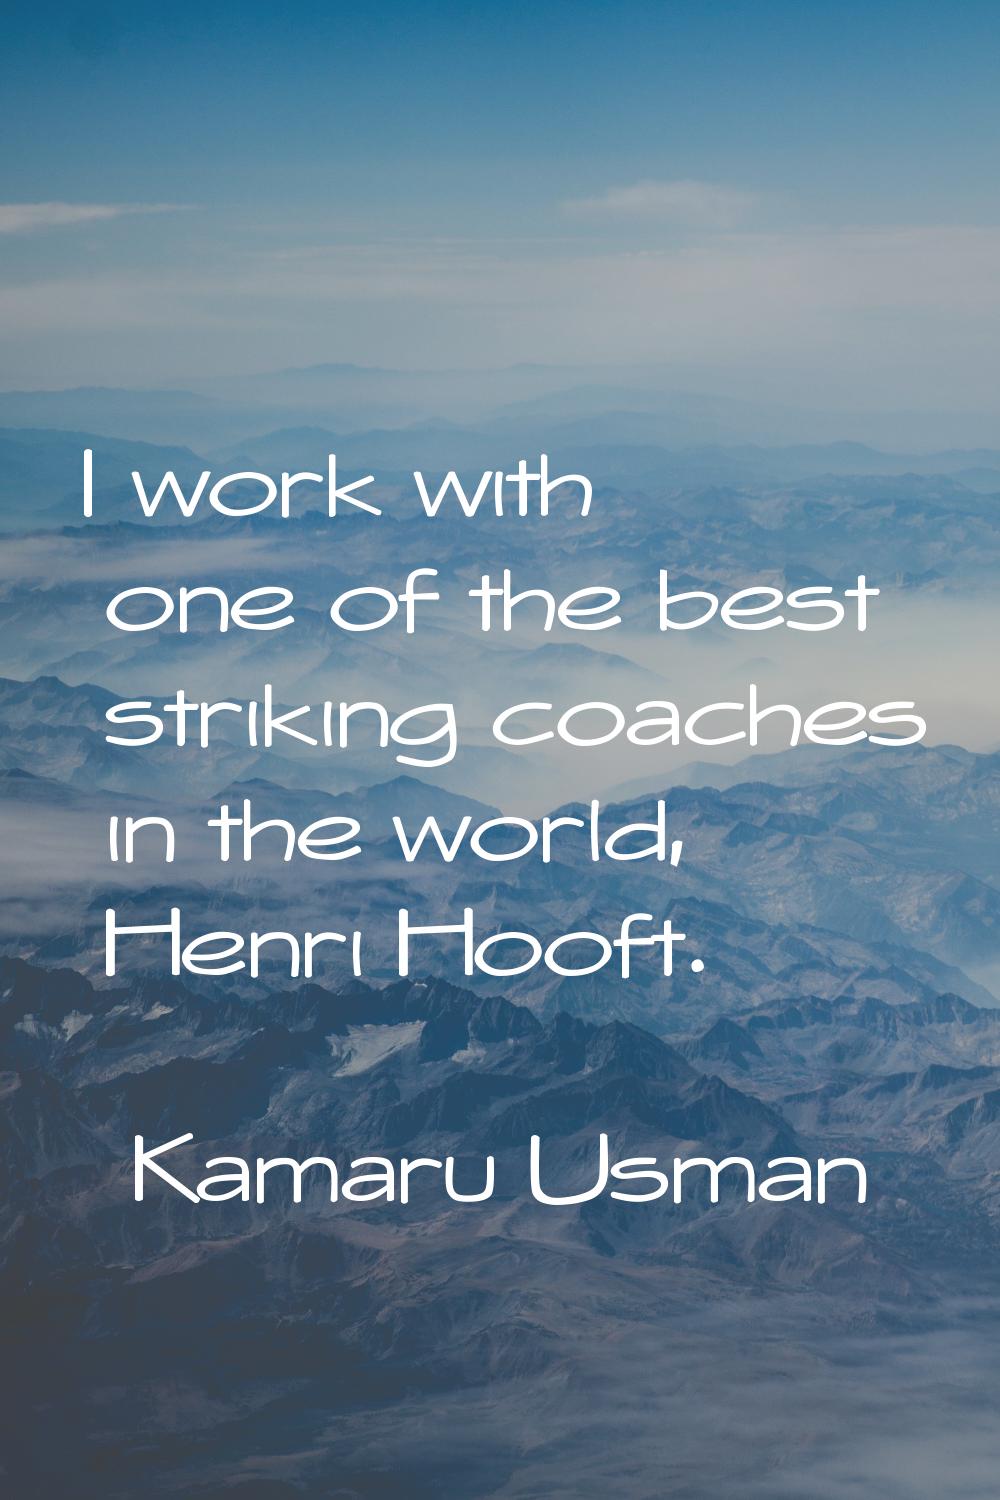 I work with one of the best striking coaches in the world, Henri Hooft.